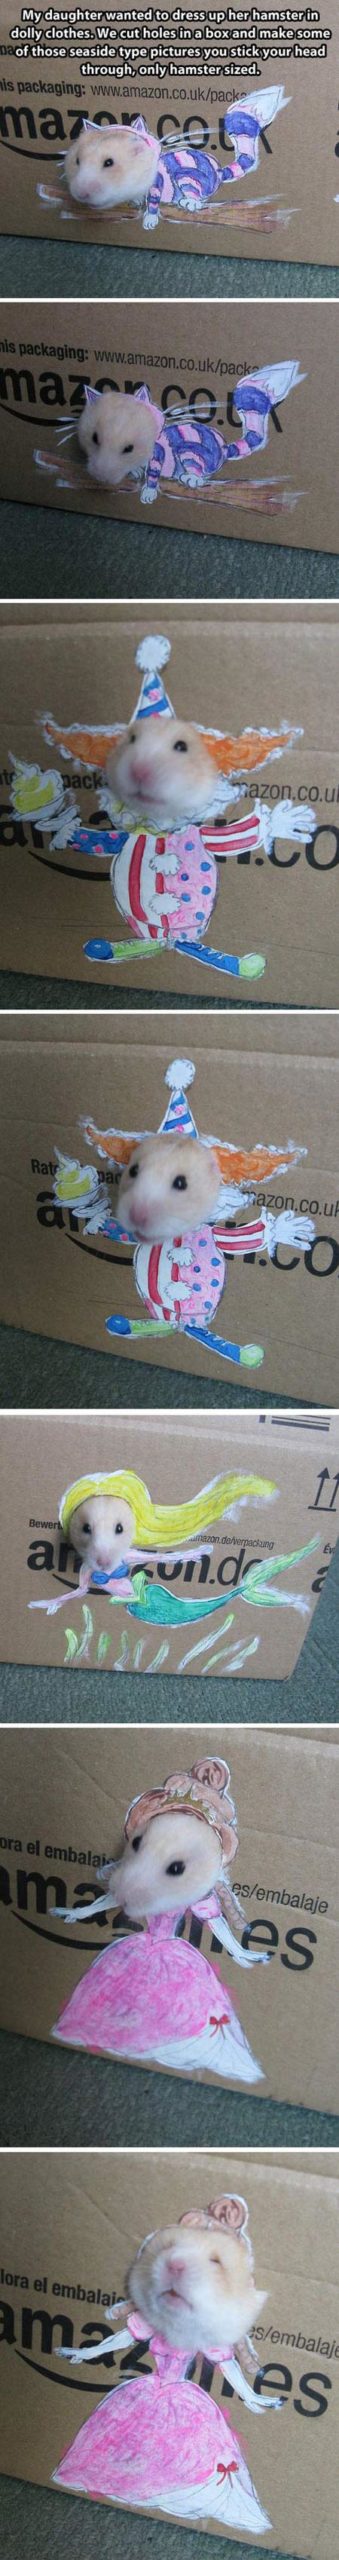 My+Daughter+Wanted+To+Dress+Up+Her+Hamster